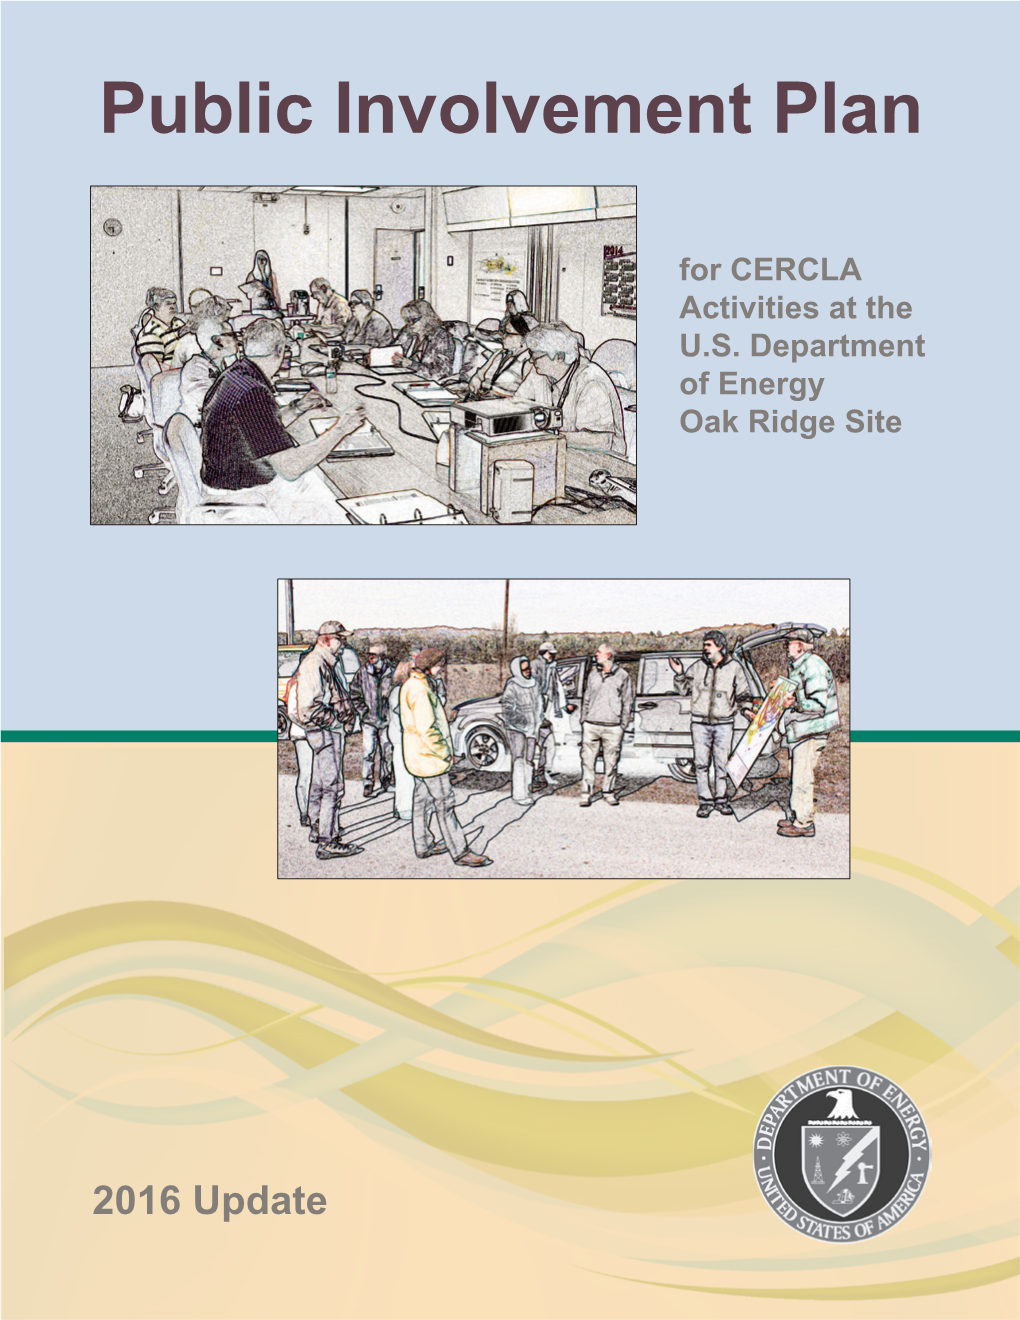 For CERCLA Activities at the US Department of Energy Oak Ridge Site